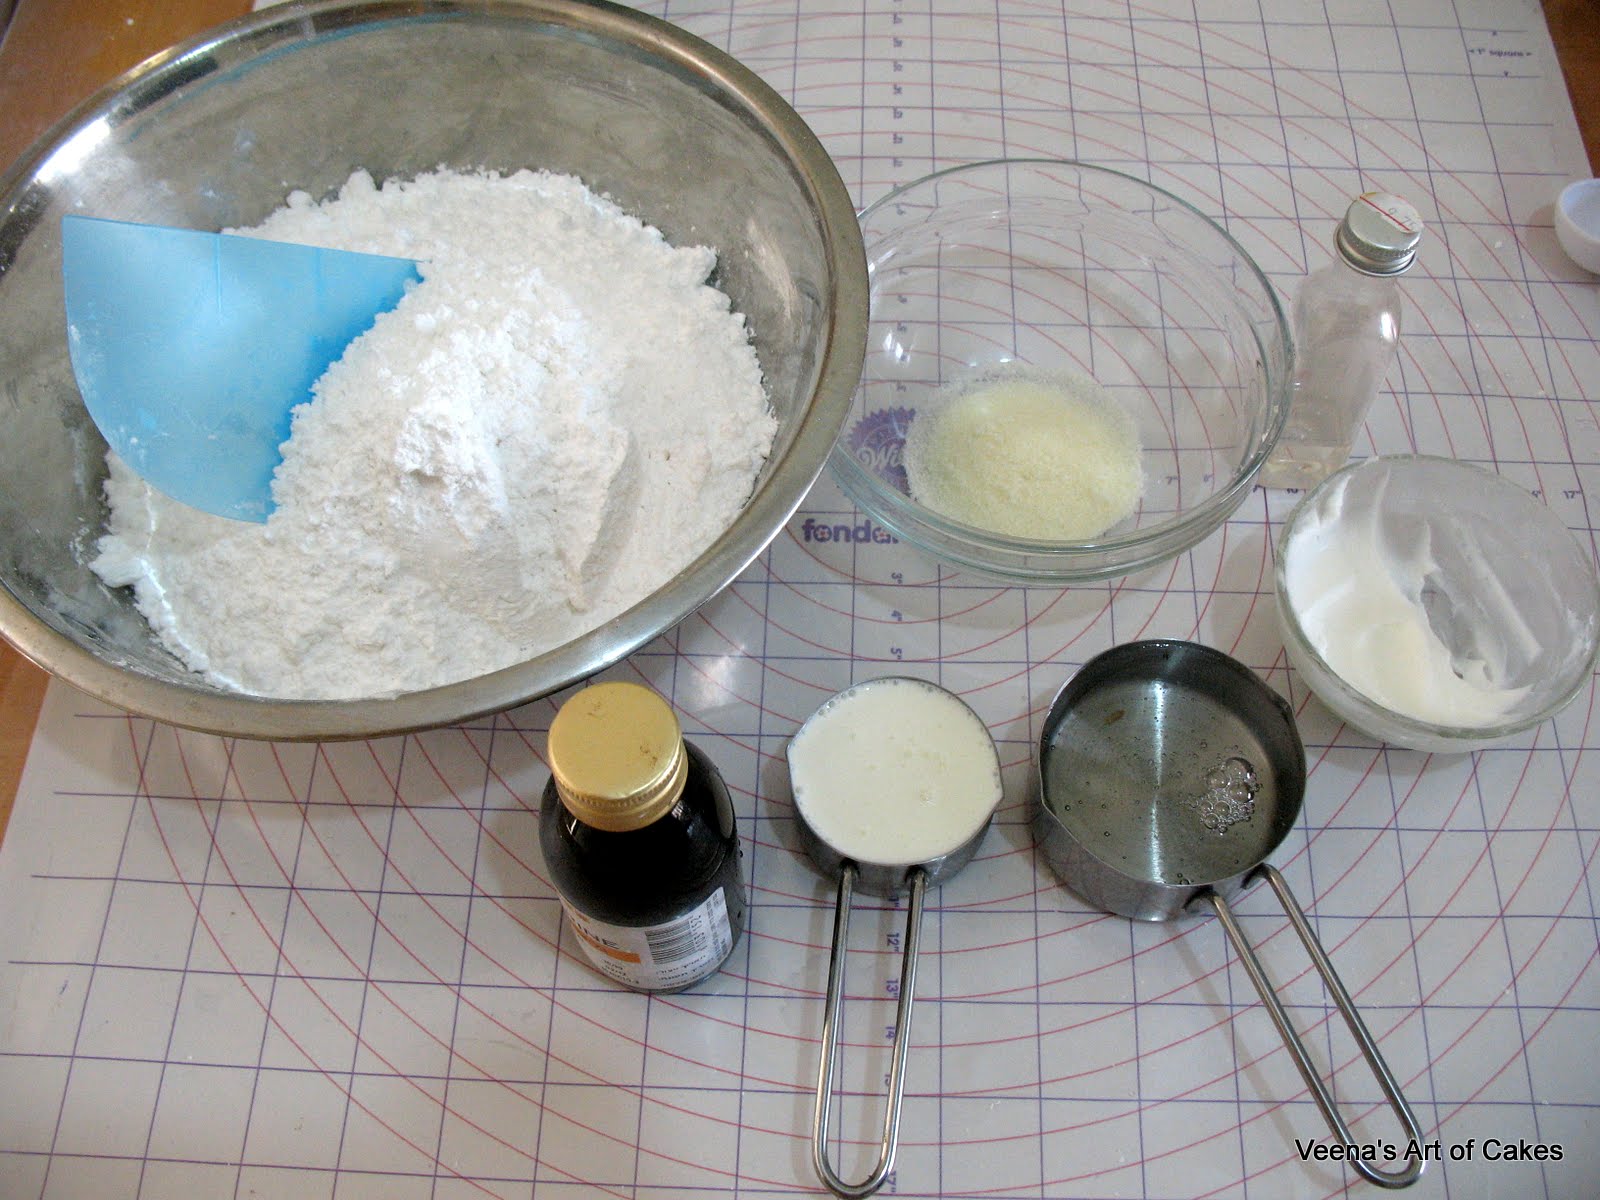 Place about 700 grams of powder sugar in a bowl.